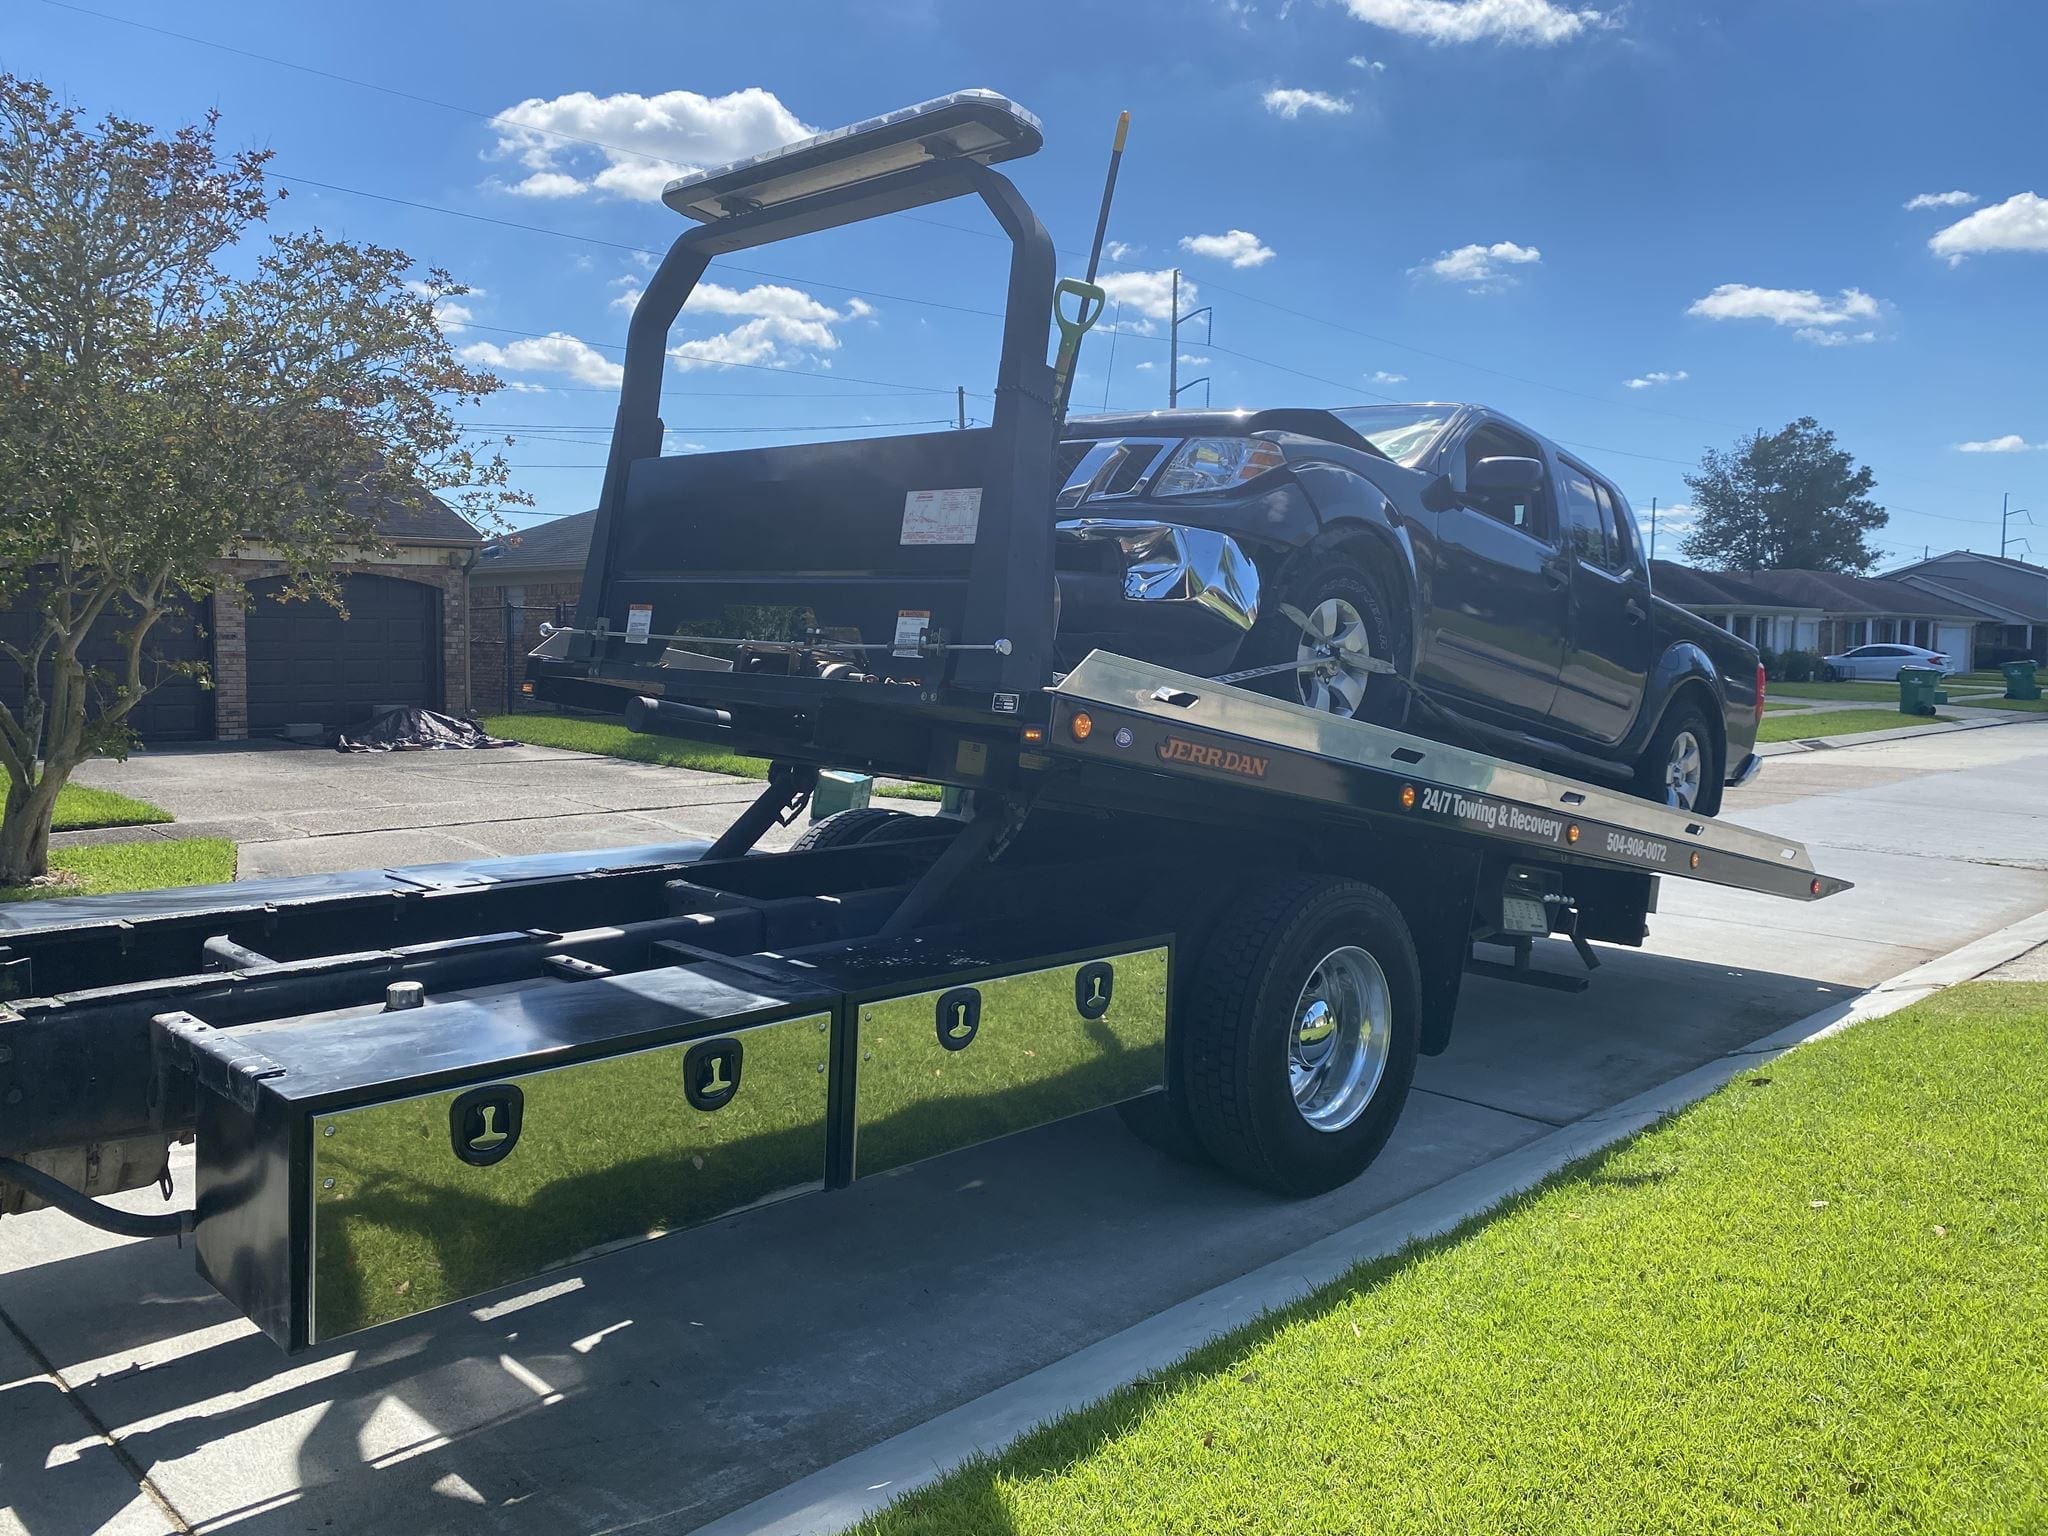 B's Towing - Local Tow Truck Wrecker Roadside Assistance Services Near Me - Local Towing Tow Truck Wrecker Roadside Assistance Services Near Me in New Orleans Louisiana (LA) and surrounding areas including but not limited to the Westbank, Harvey, Gretna, Algiers, Marrero, Westwego, Belle Chasse, Chalmette, Kenner & Metairie.